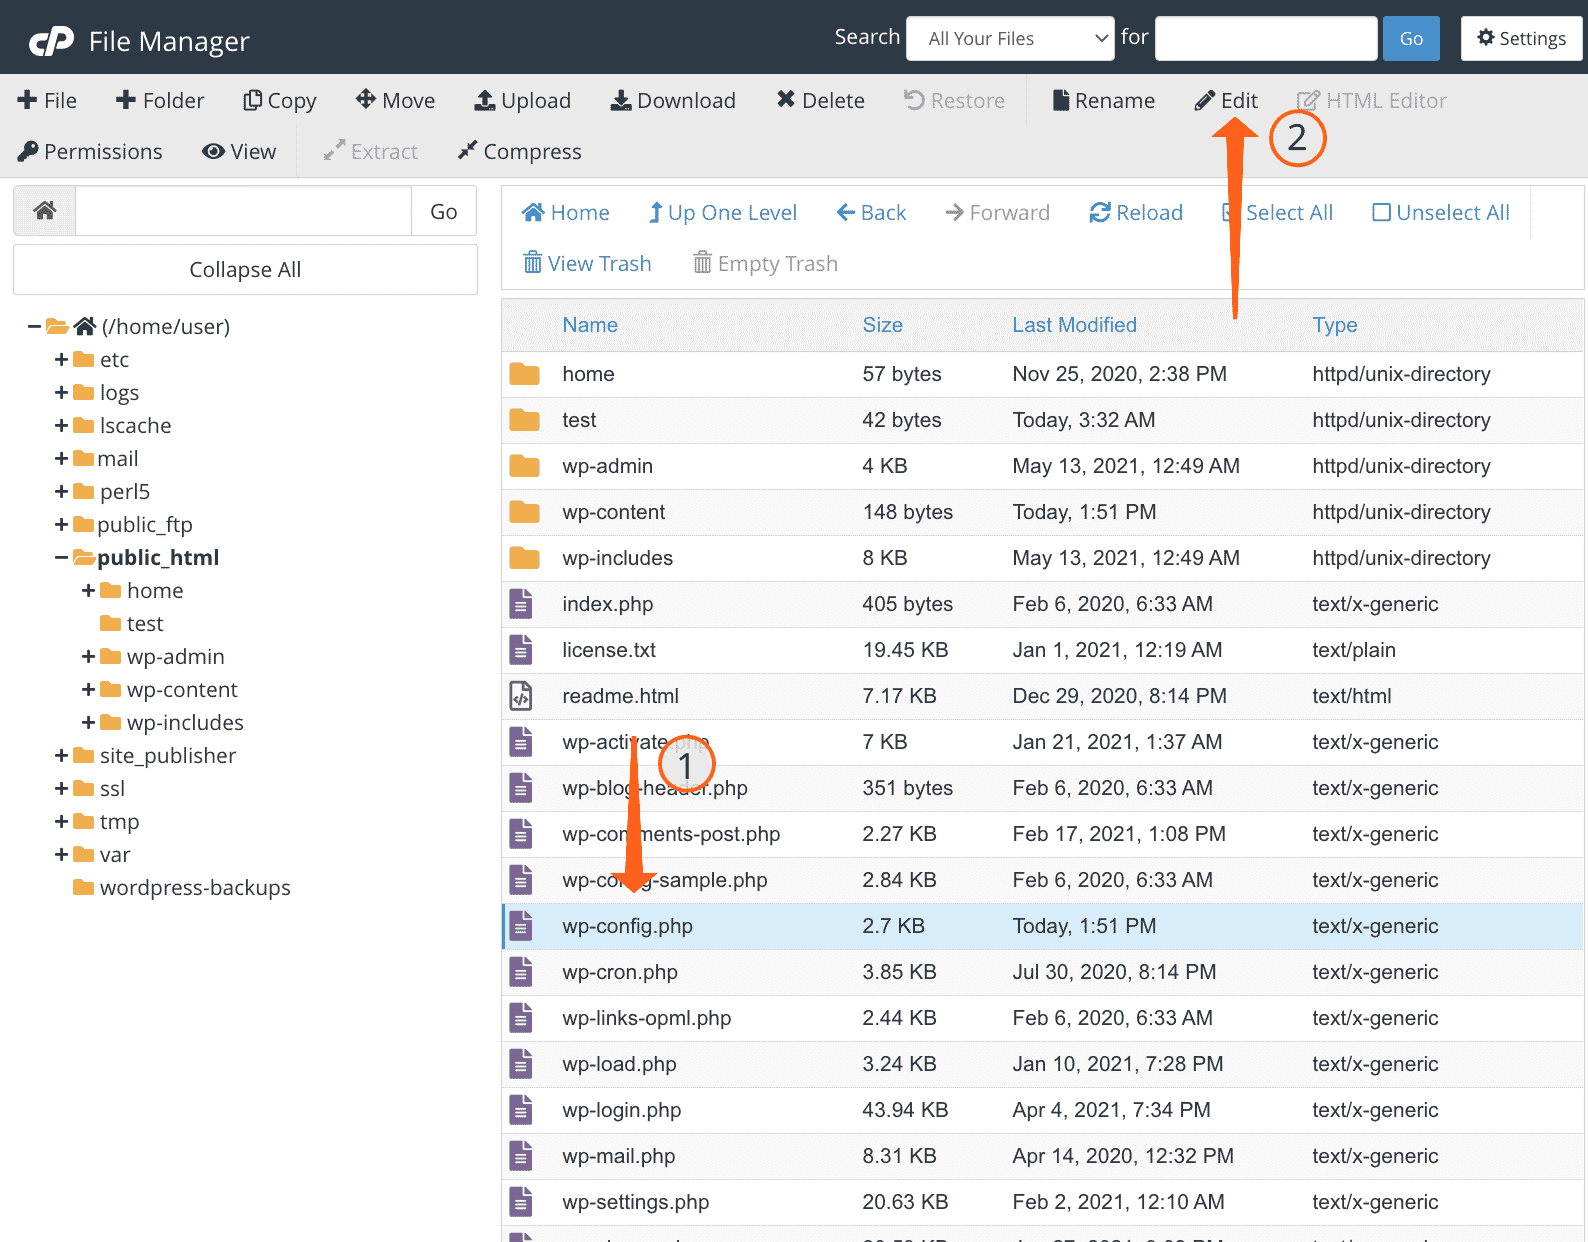 Locating the wp-config.php file in the cPanel File Manager tool